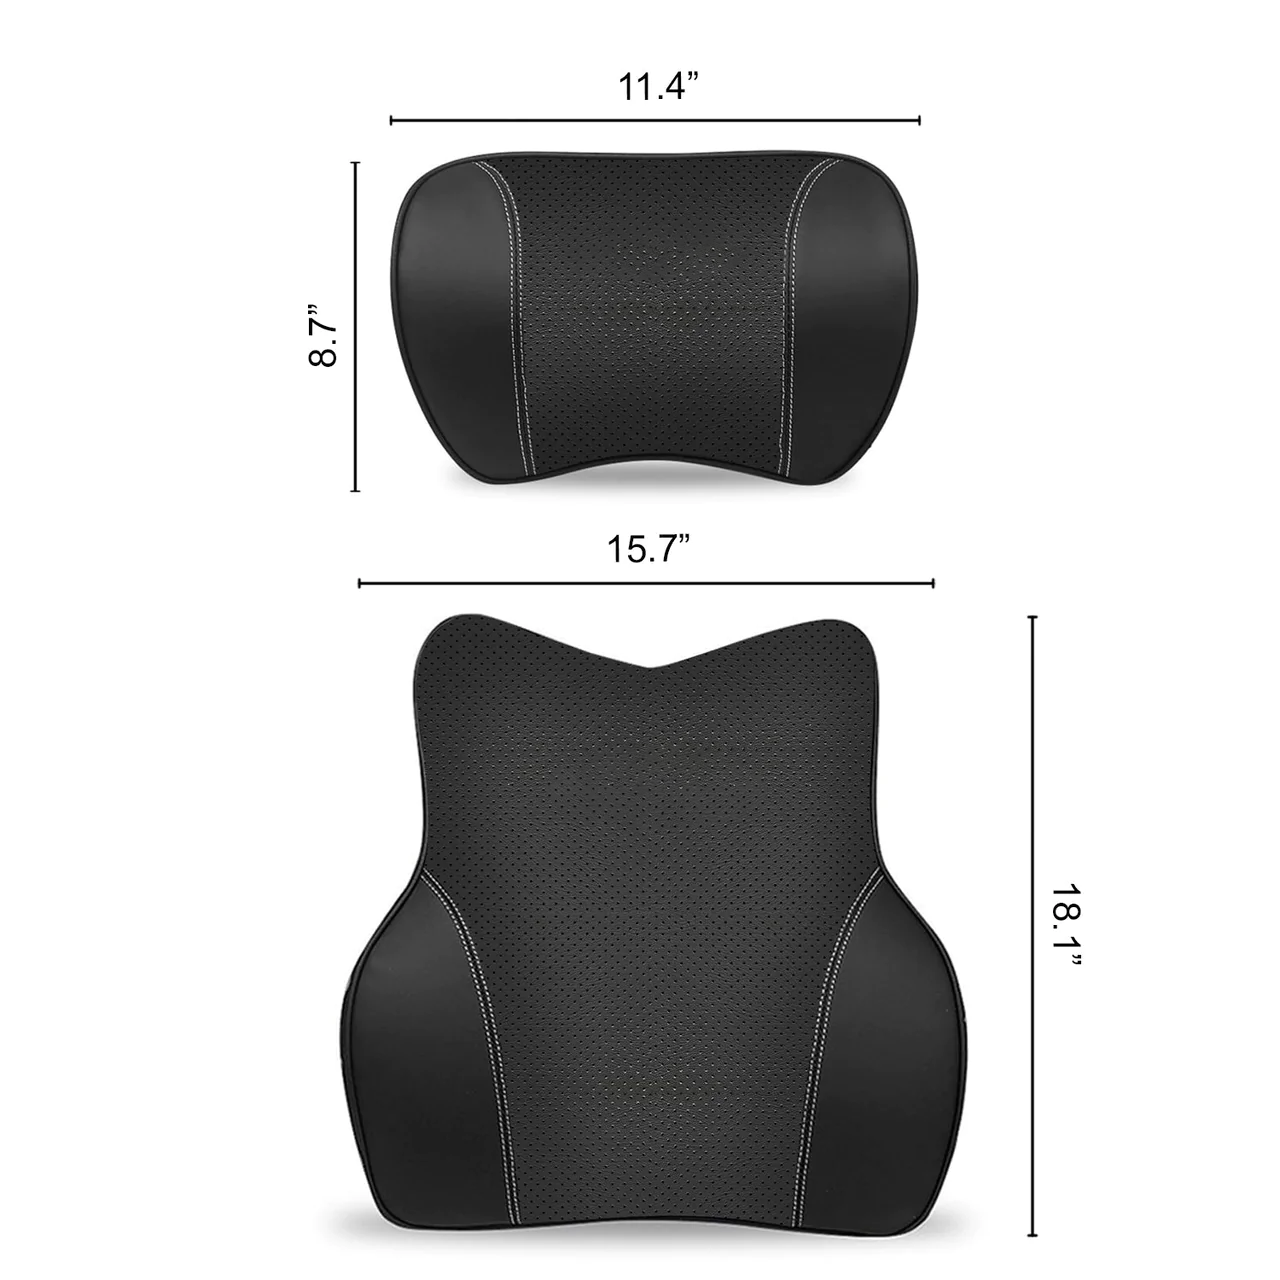 Custom Text For Car Headrest Neck Pillow and Lumbar Support Back Cushion Kit, Compatible with All Cars, Memory Foam Erognomic Design Universal Fit Muscle Pain and Tension Relief for Car Seat UE13992